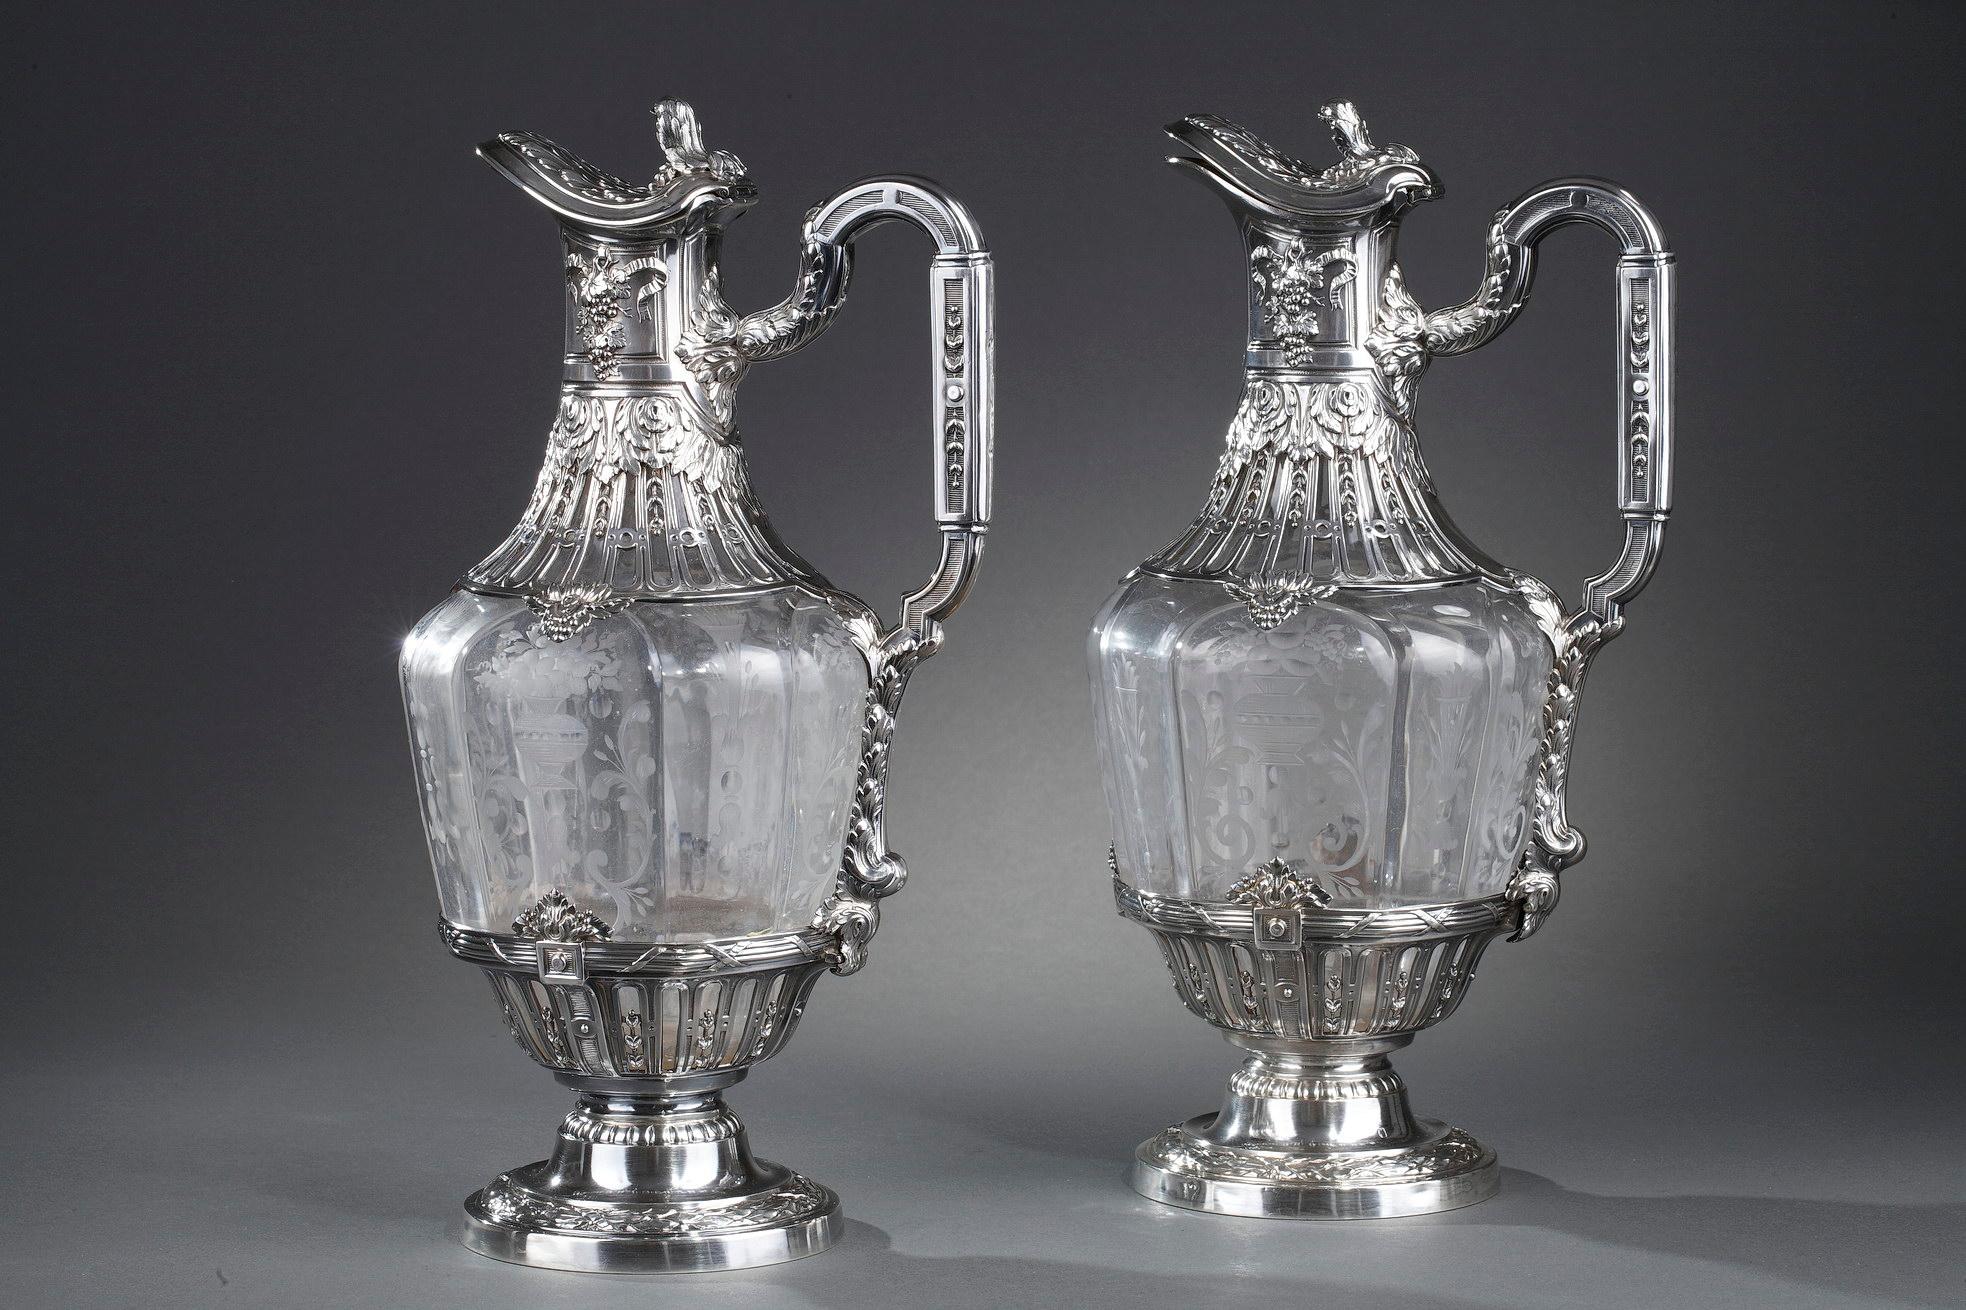 Pair of crystal ewer and silver mounted. The crystal is engraved with floral baskets or baskets of flowers. The top of the ewers is finely chiseled with floral motifs and grapefruit. The beak is closed by a lid whose grip is decorated with a floral